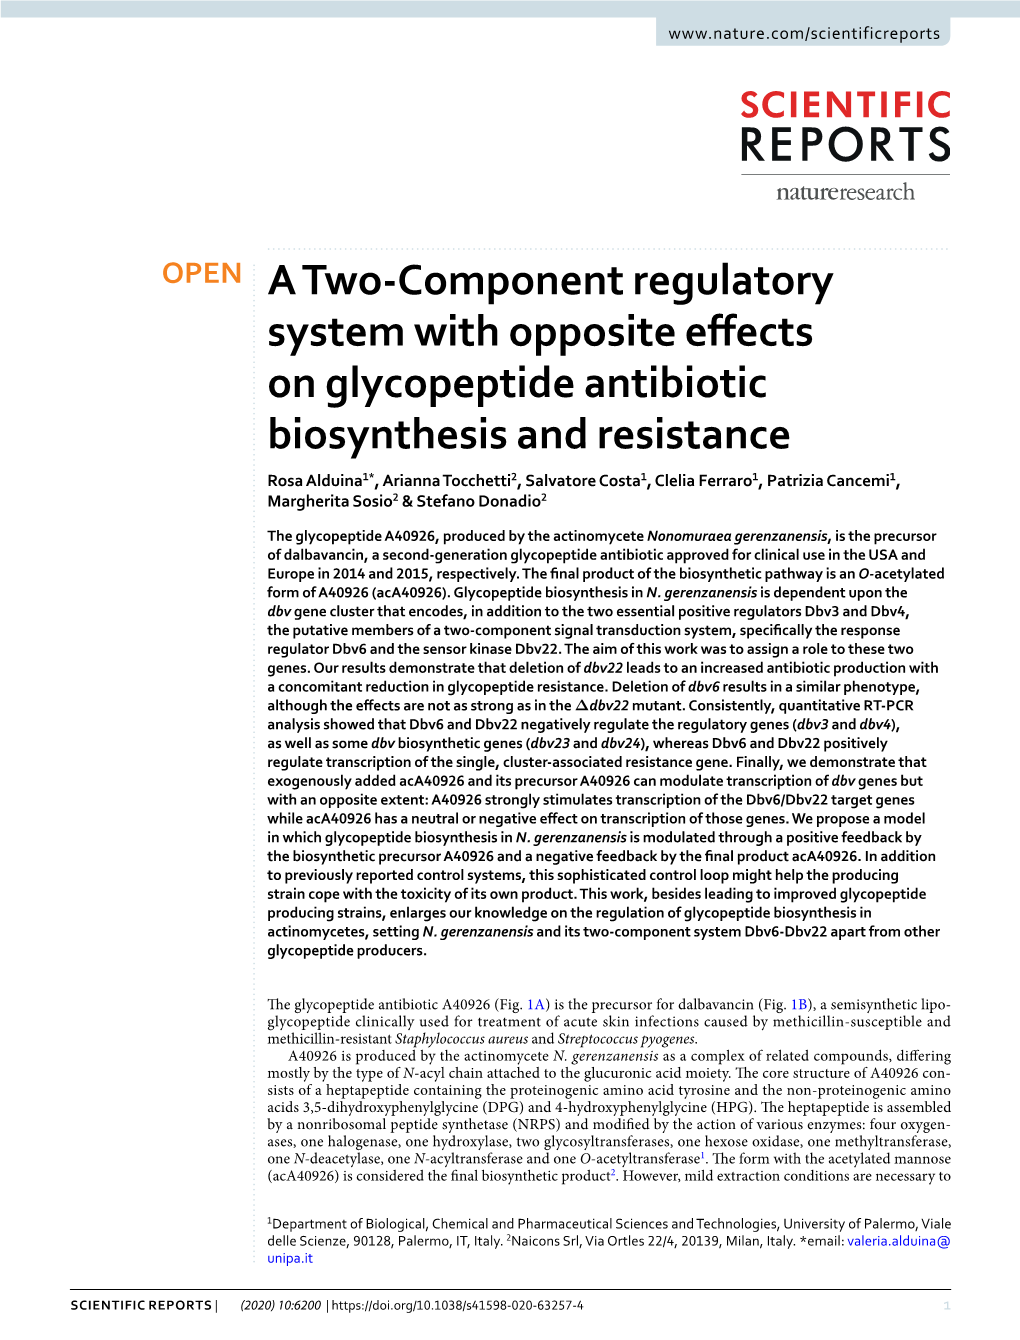 A Two-Component Regulatory System with Opposite Effects on Glycopeptide Antibiotic Biosynthesis and Resistance